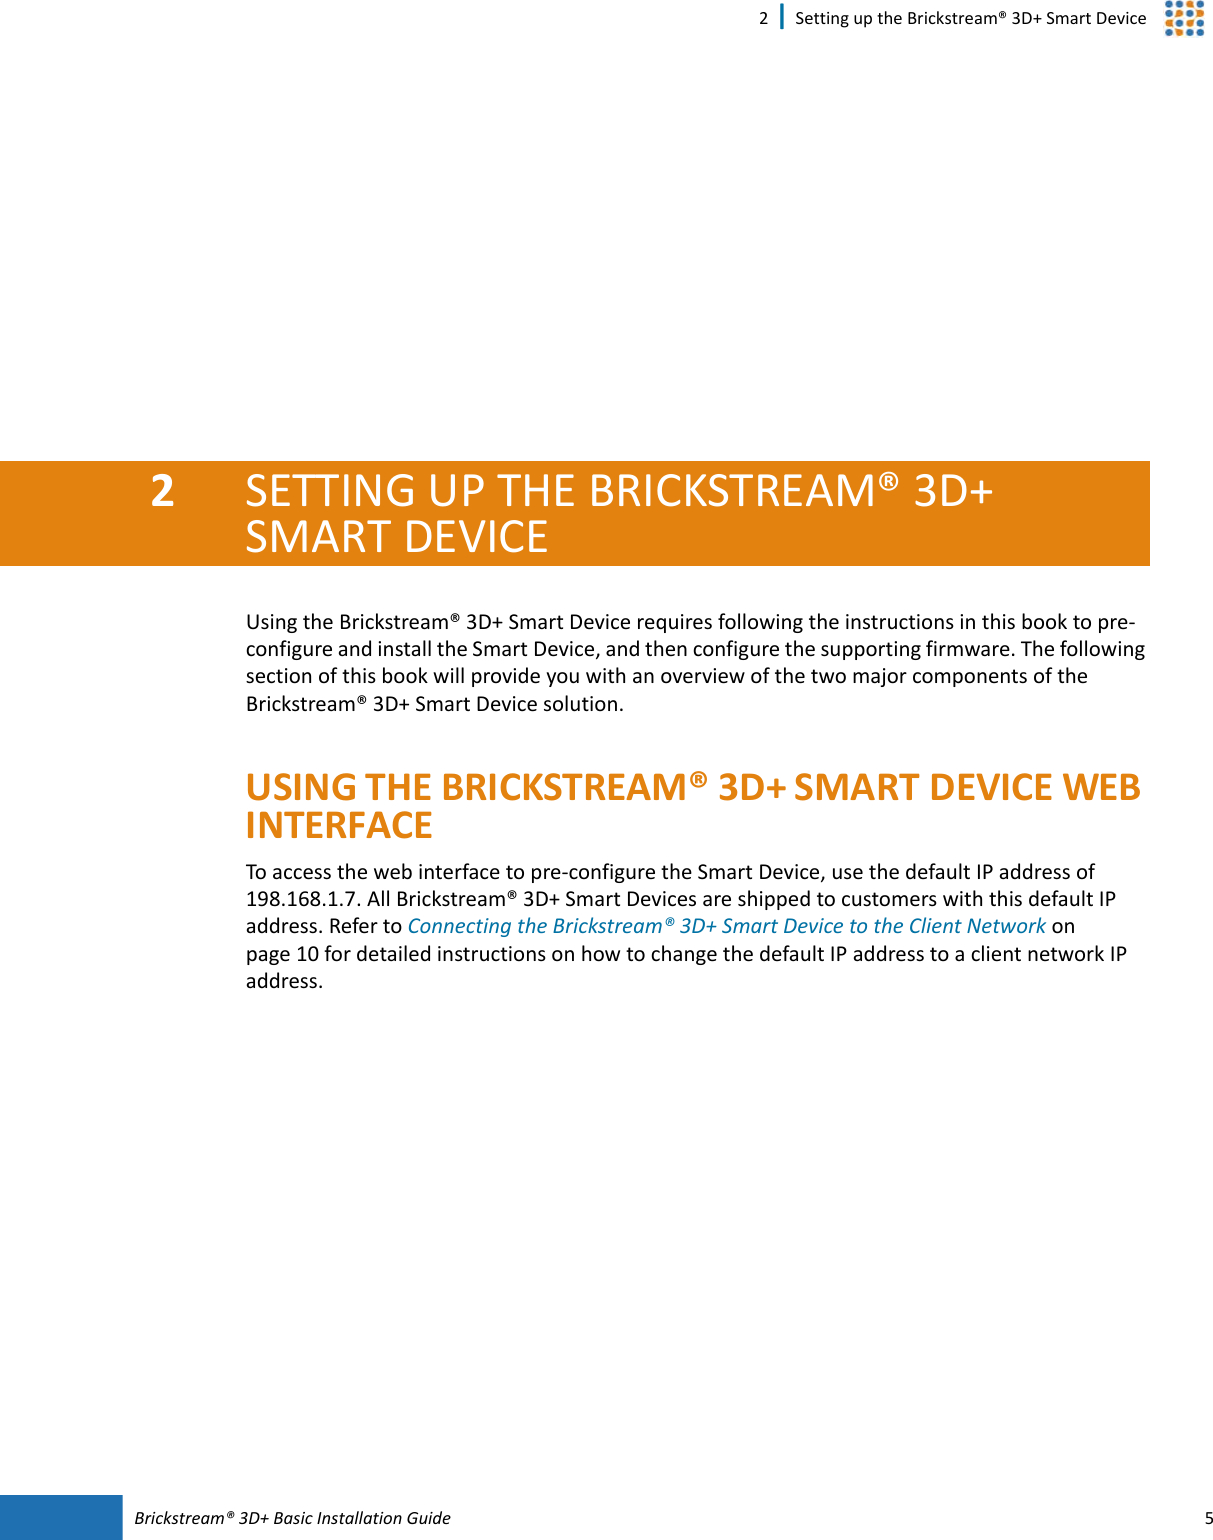 Brickstream®  3D+ Basic Installation Guide 52 | Setting up the Brickstream® 3D+ Smart Device2SETTING UP THE BRICKSTREAM®  3D+ SMART  DEVICEUsing the Brickstream® 3D+ Smart  Device requires following the instructions in this book to pre-configure and install the Smart  Device, and then configure the supporting firmware. The following section of this book will provide you with an overview of the two major components of the Brickstream® 3D+ Smart Device solution.USING THE BRICKSTREAM® 3D+ SMART DEVICE WEB INTERFACETo access the web interface to pre-configure the Smart  Device, use the default IP address of 198.168.1.7. All Brickstream® 3D+ Smart  Devices are shipped to customers with this default IP address. Refer to Connecting the Brickstream® 3D+ Smart  Device to the Client Network on page  10 for detailed instructions on how to change the default IP address to a client network IP address.